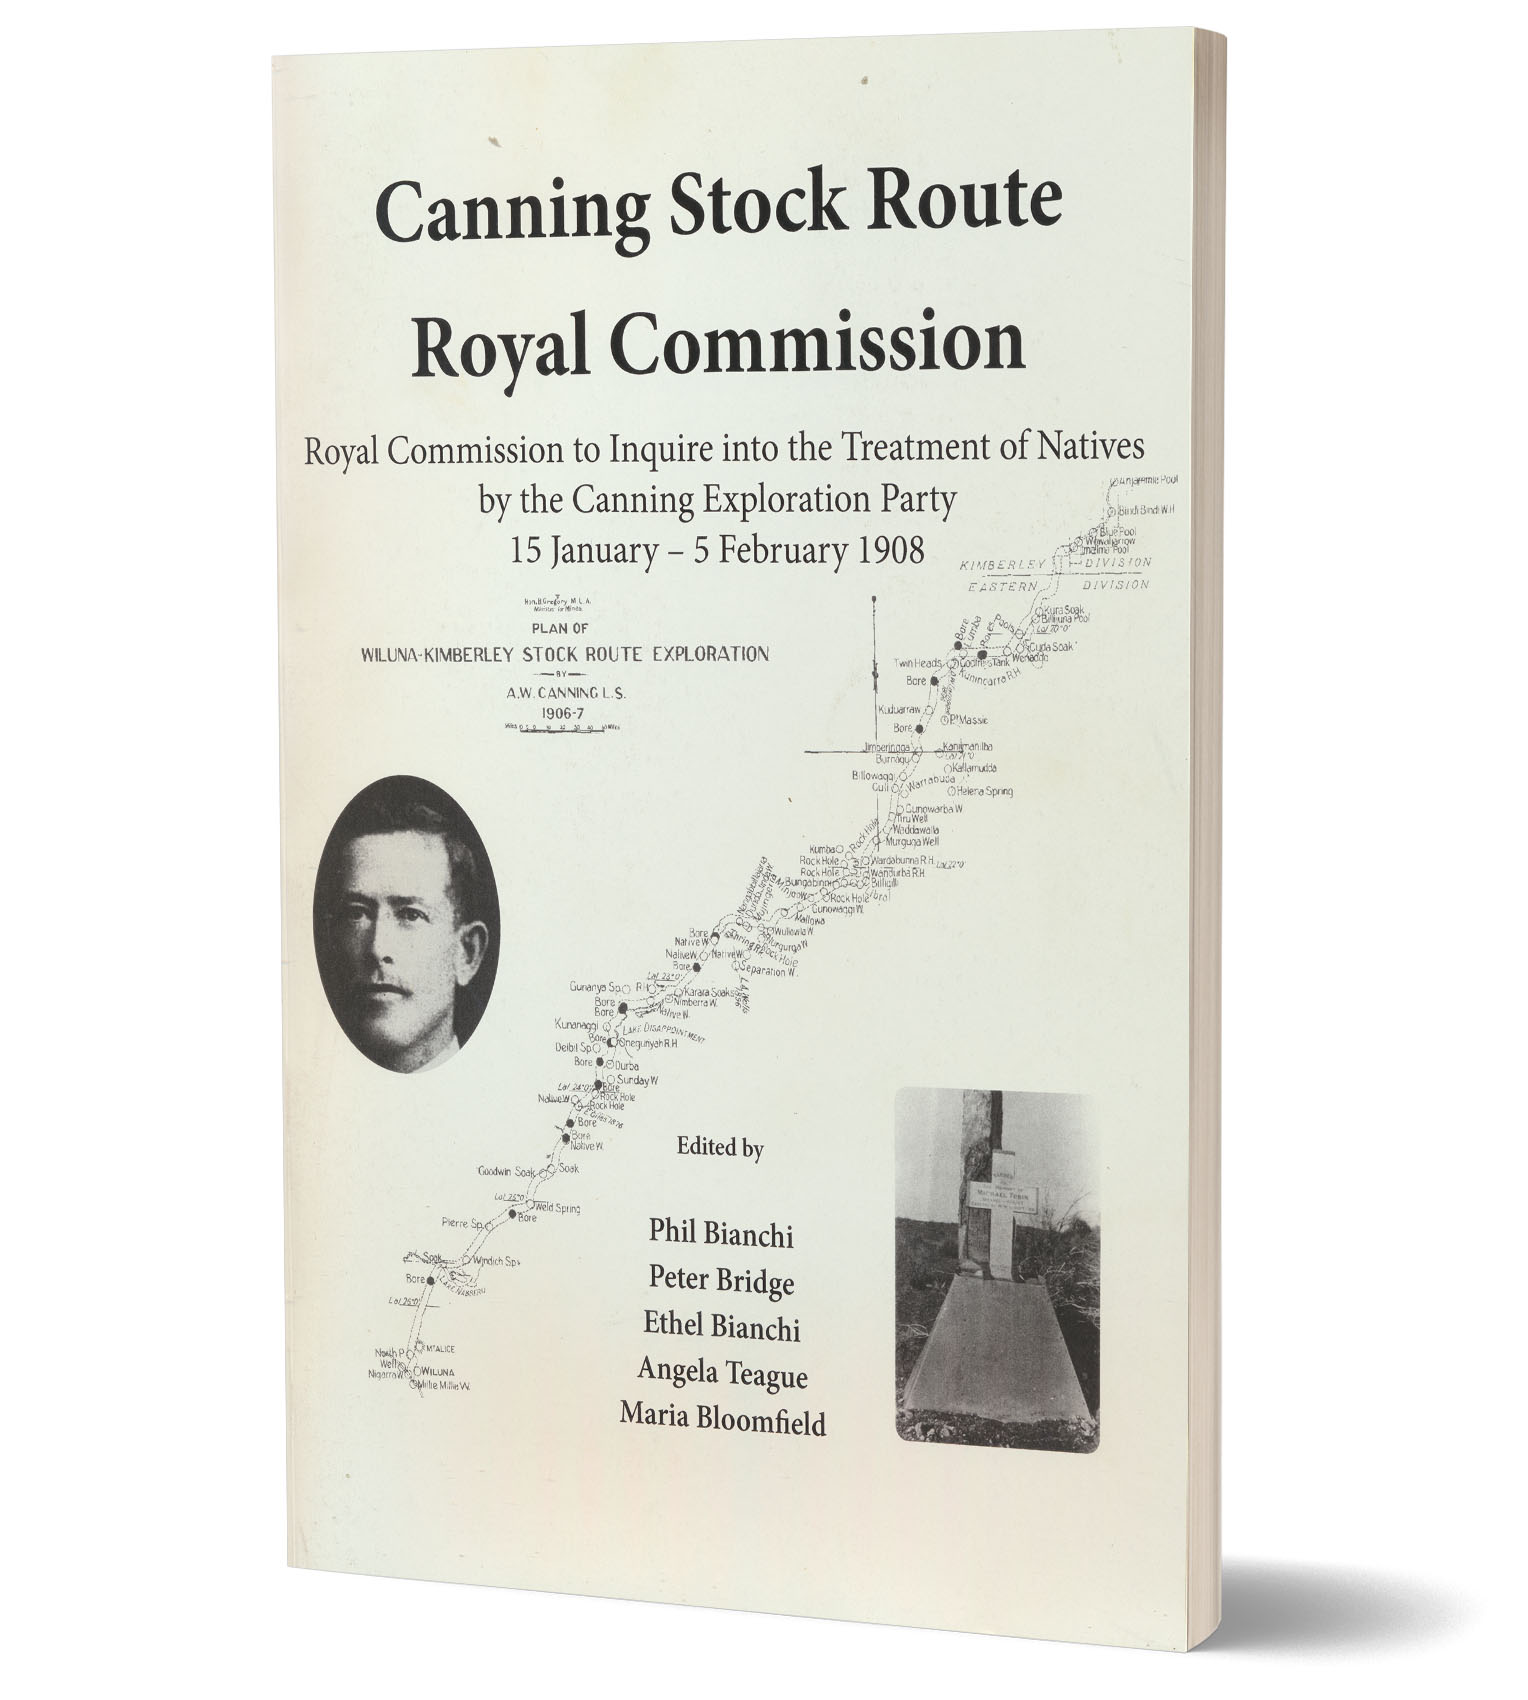 Canning Stock Route Royal Commission 